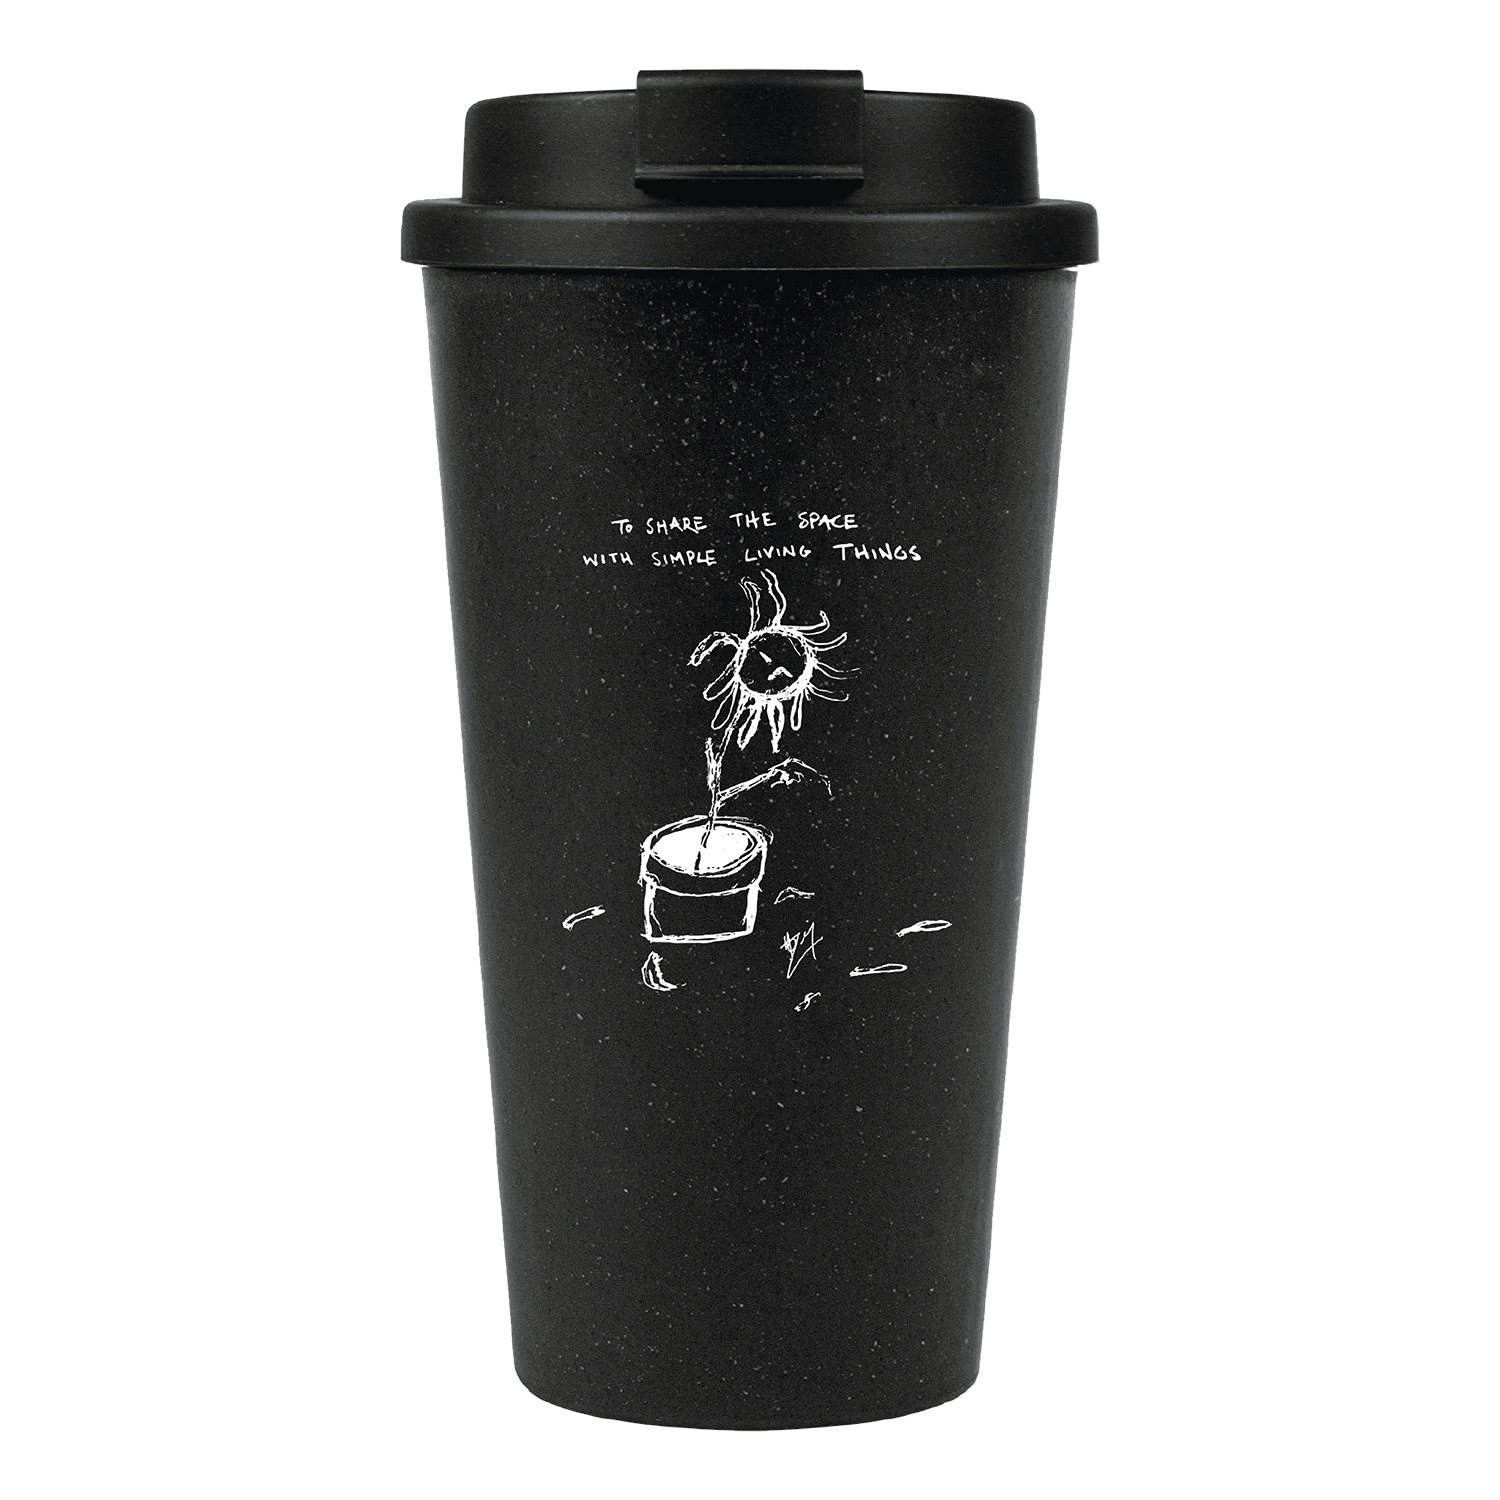 Simple Living Things Reusable Cup - Hozier